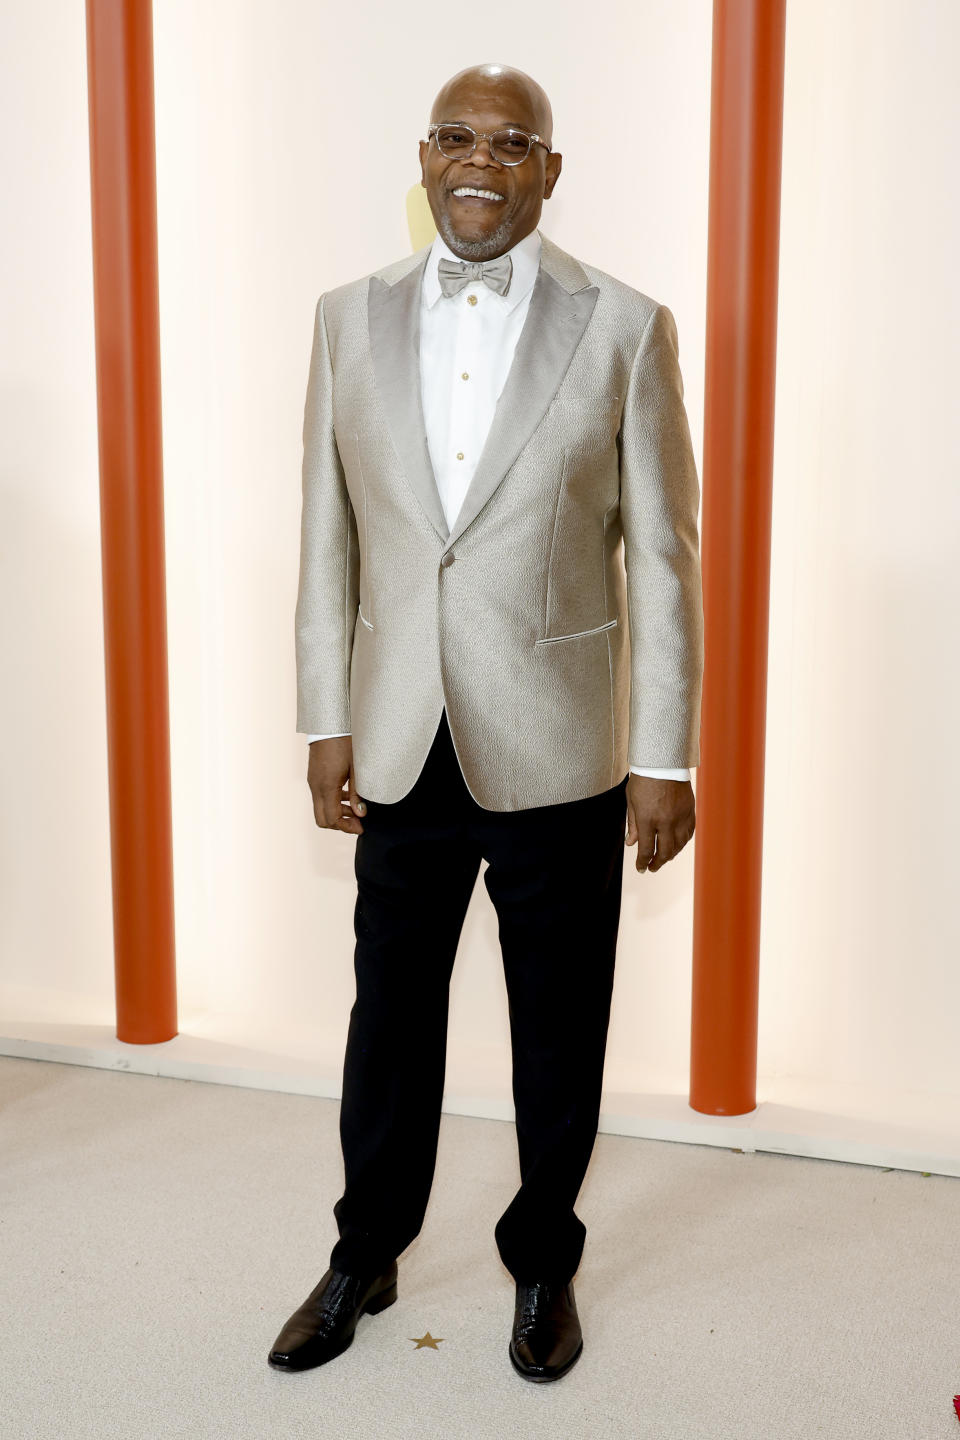 HOLLYWOOD, CALIFORNIA - MARCH 12: Samuel L. Jackson attends the 95th Annual Academy Awards on March 12, 2023 in Hollywood, California. (Photo by Mike Coppola/Getty Images)